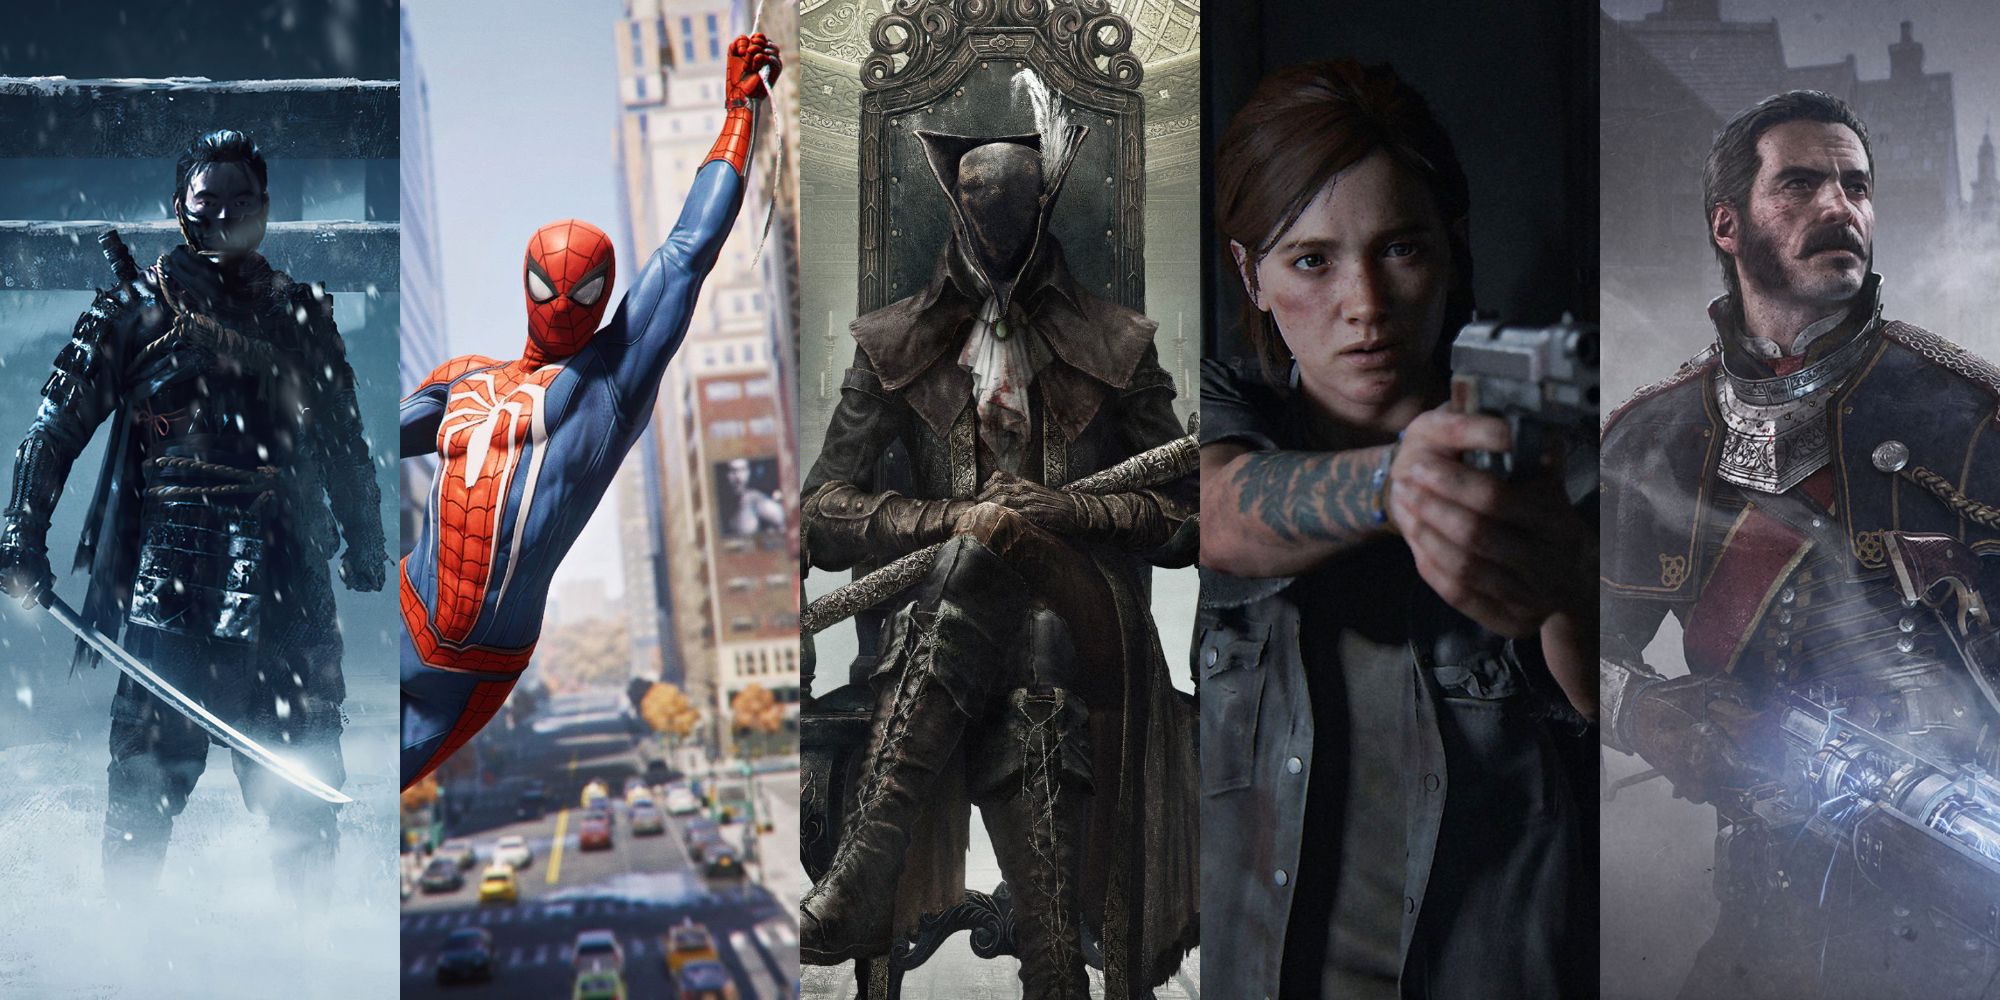 PS4 Exclusive Games, PlayStation Exclusives